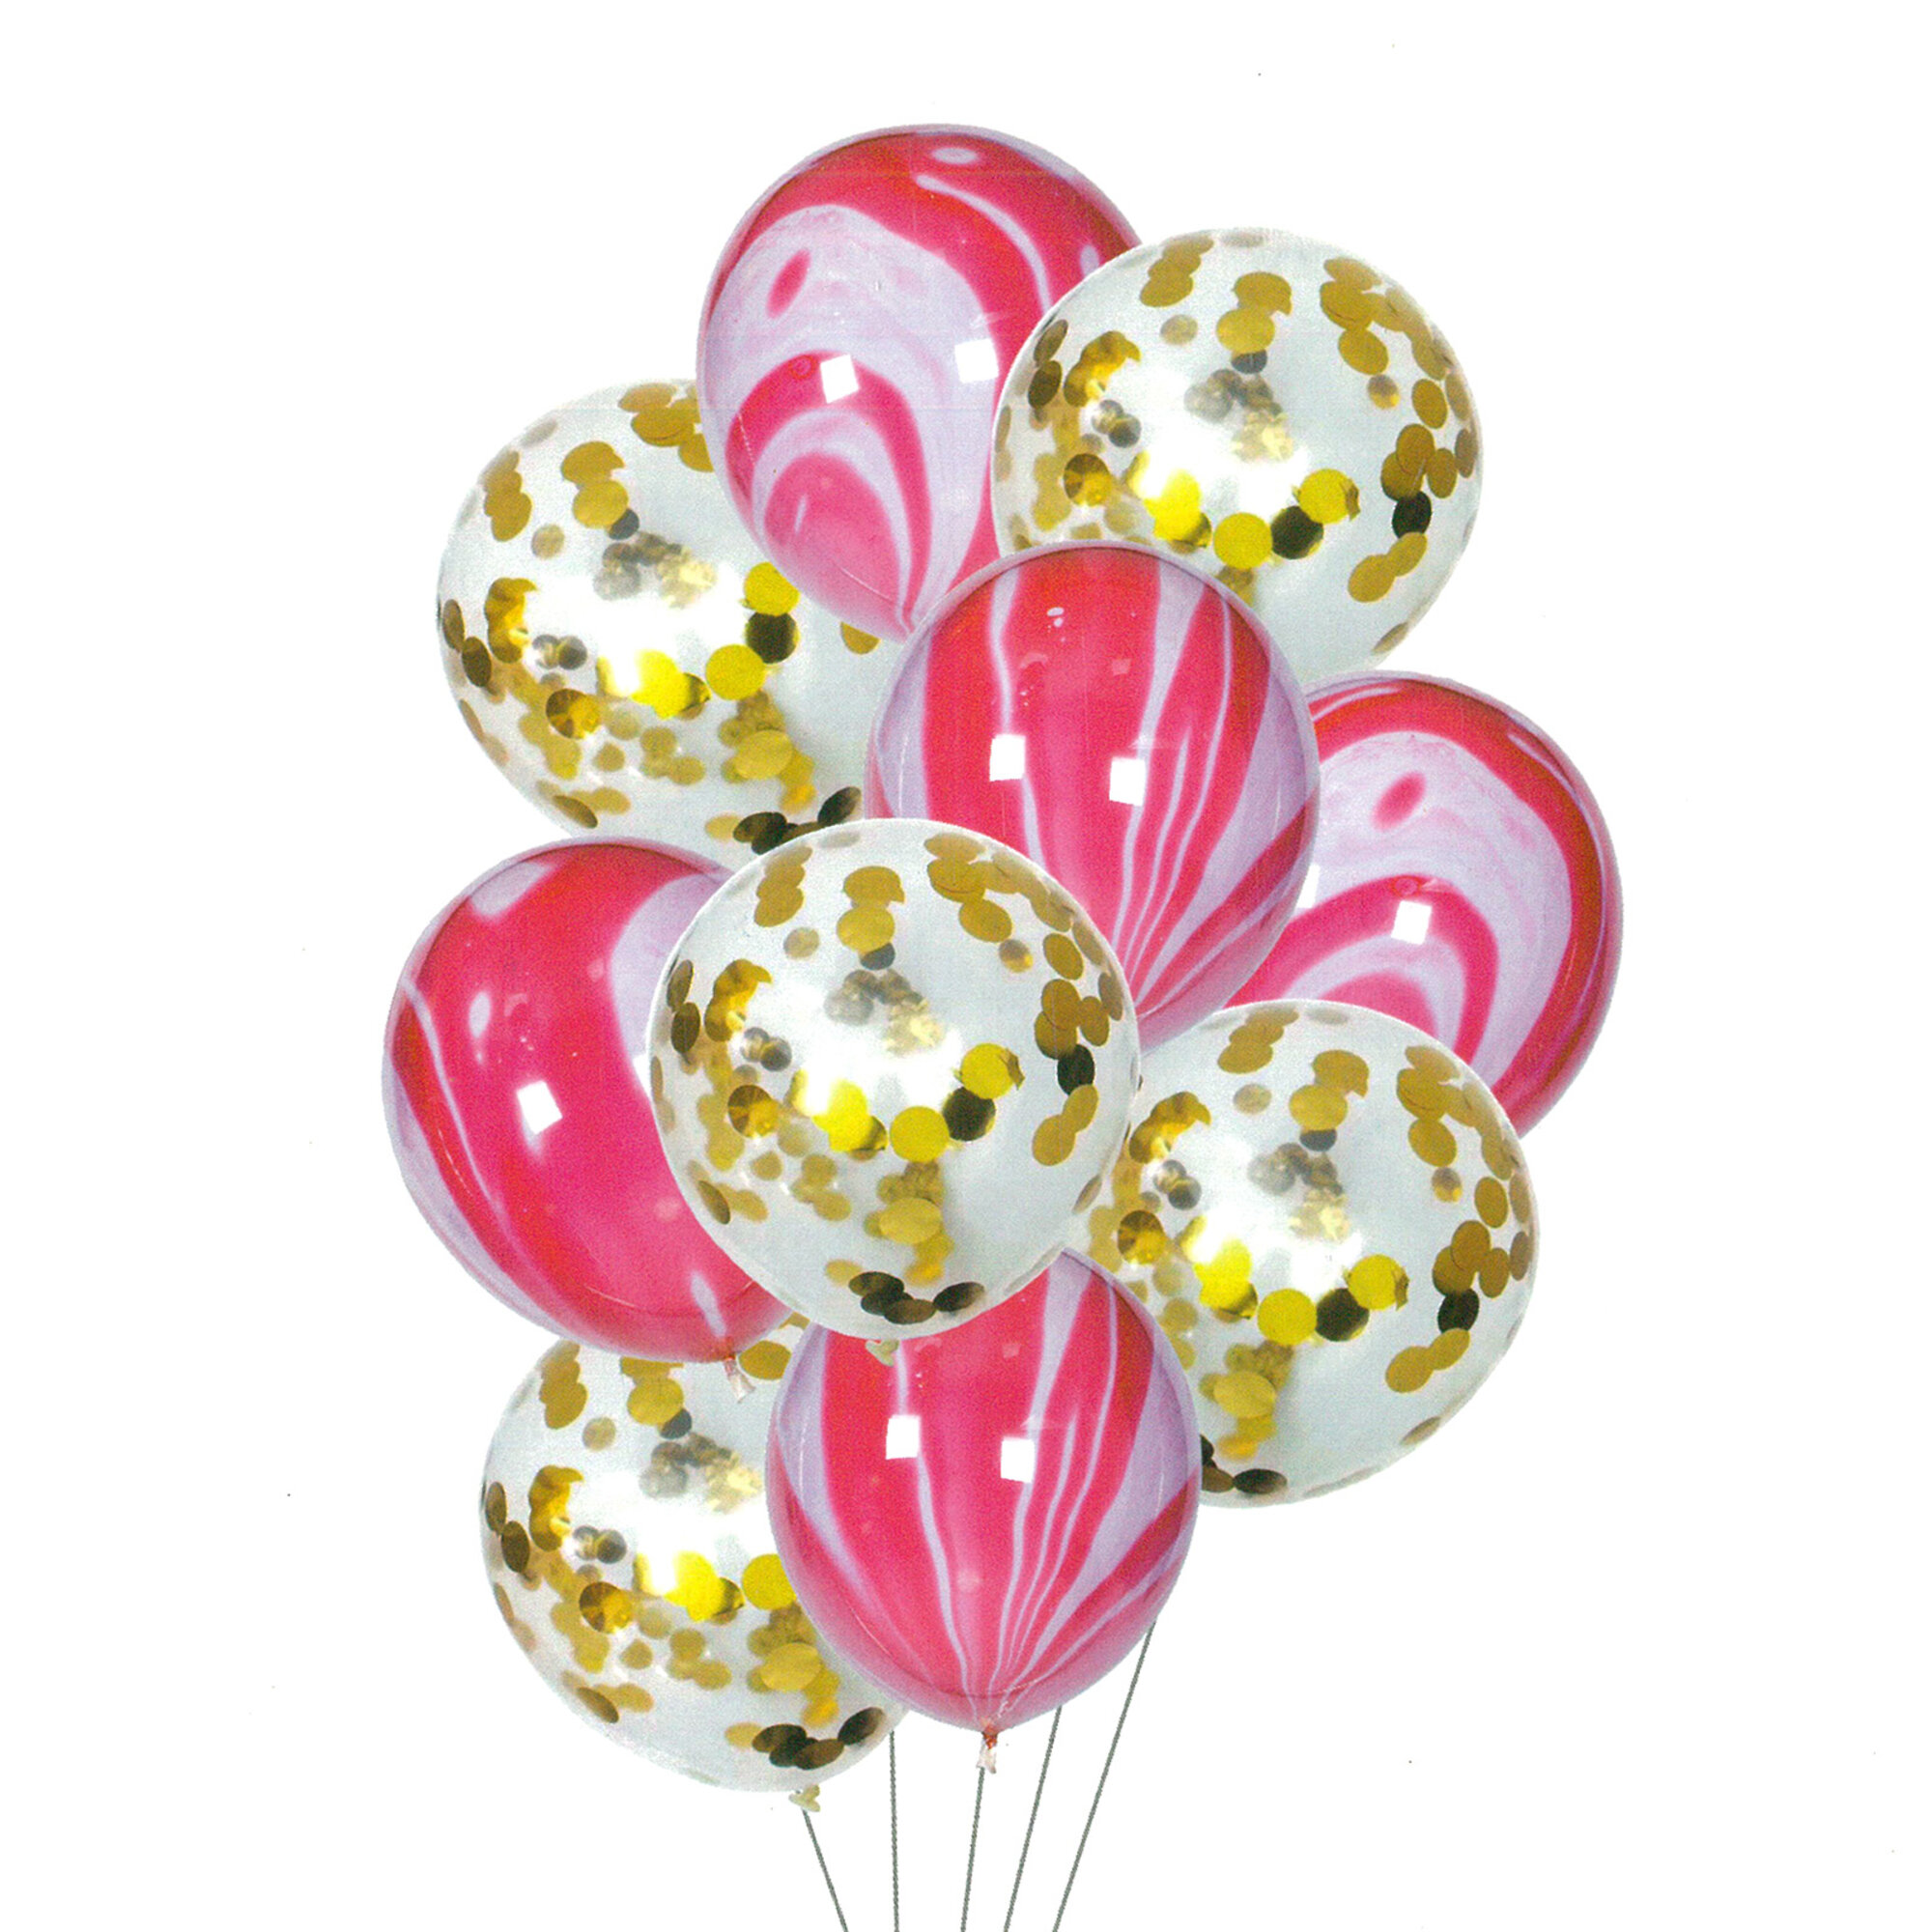 Balloons (Set of 10) - Red Unicorn with Clear Glitters